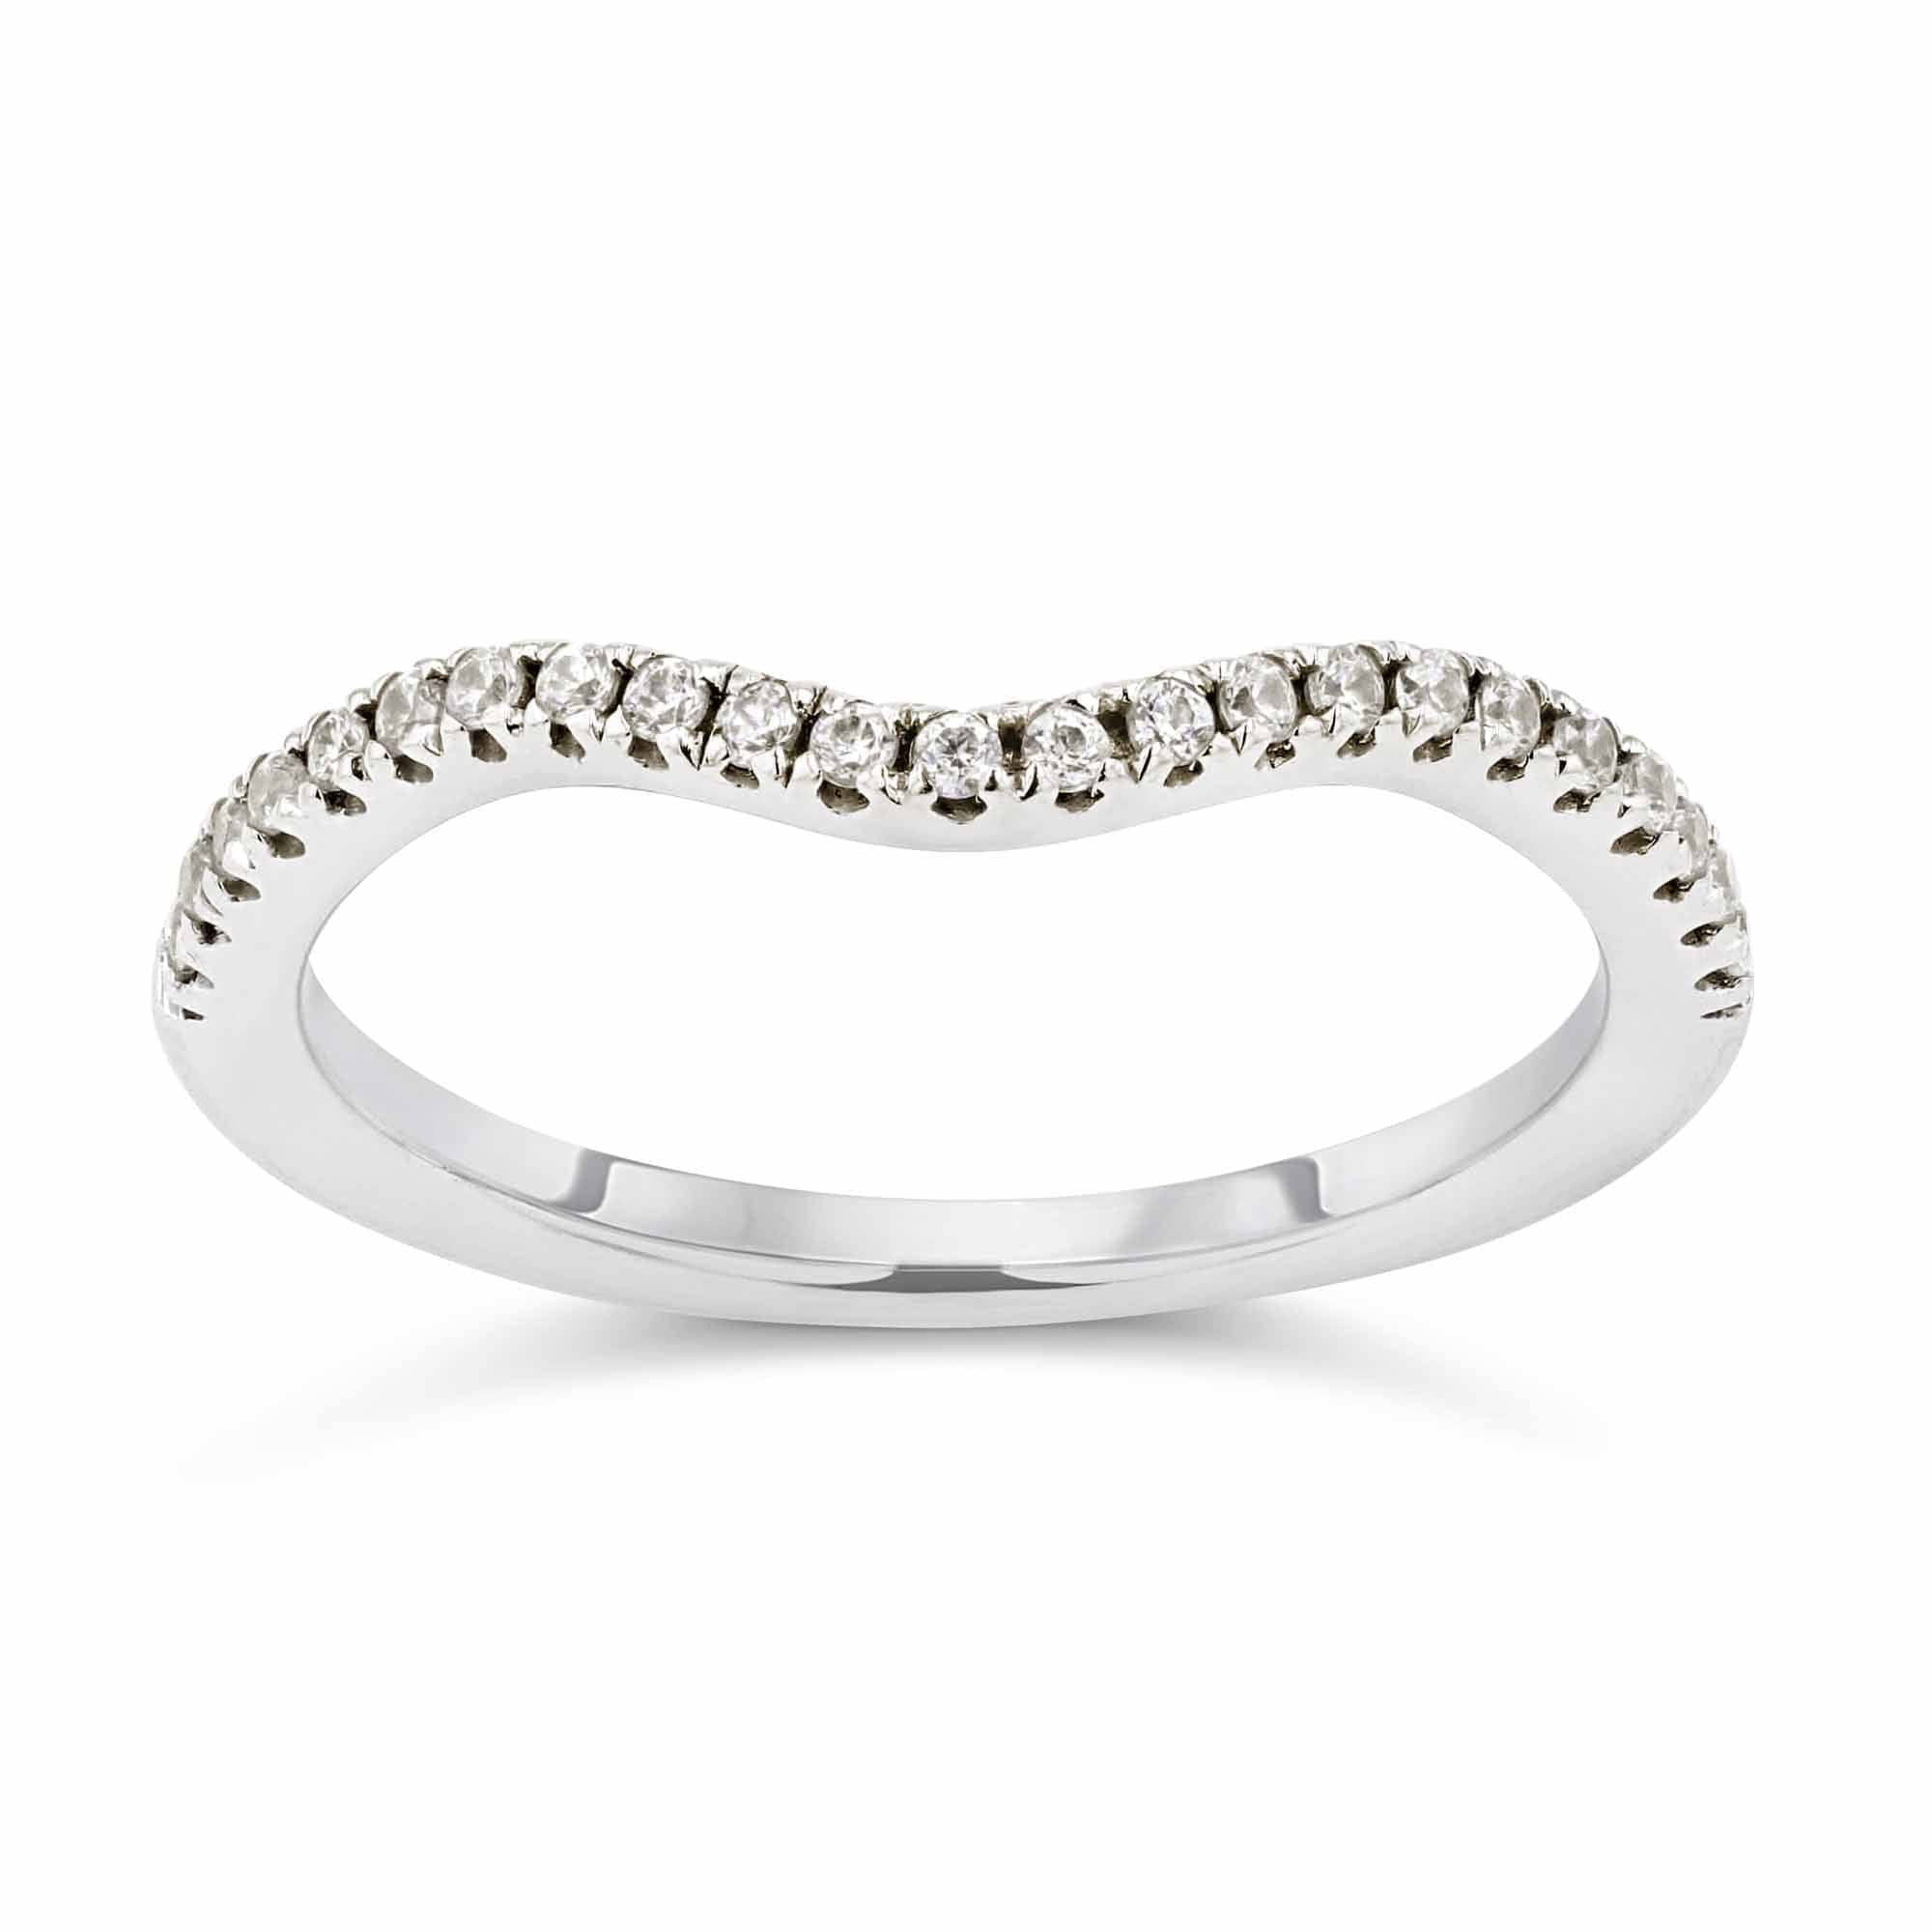 Glisan Wedding Band Shown in 14K White Gold|glisan curved contour band with accenting lab grown diamonds shown in 14k white gold